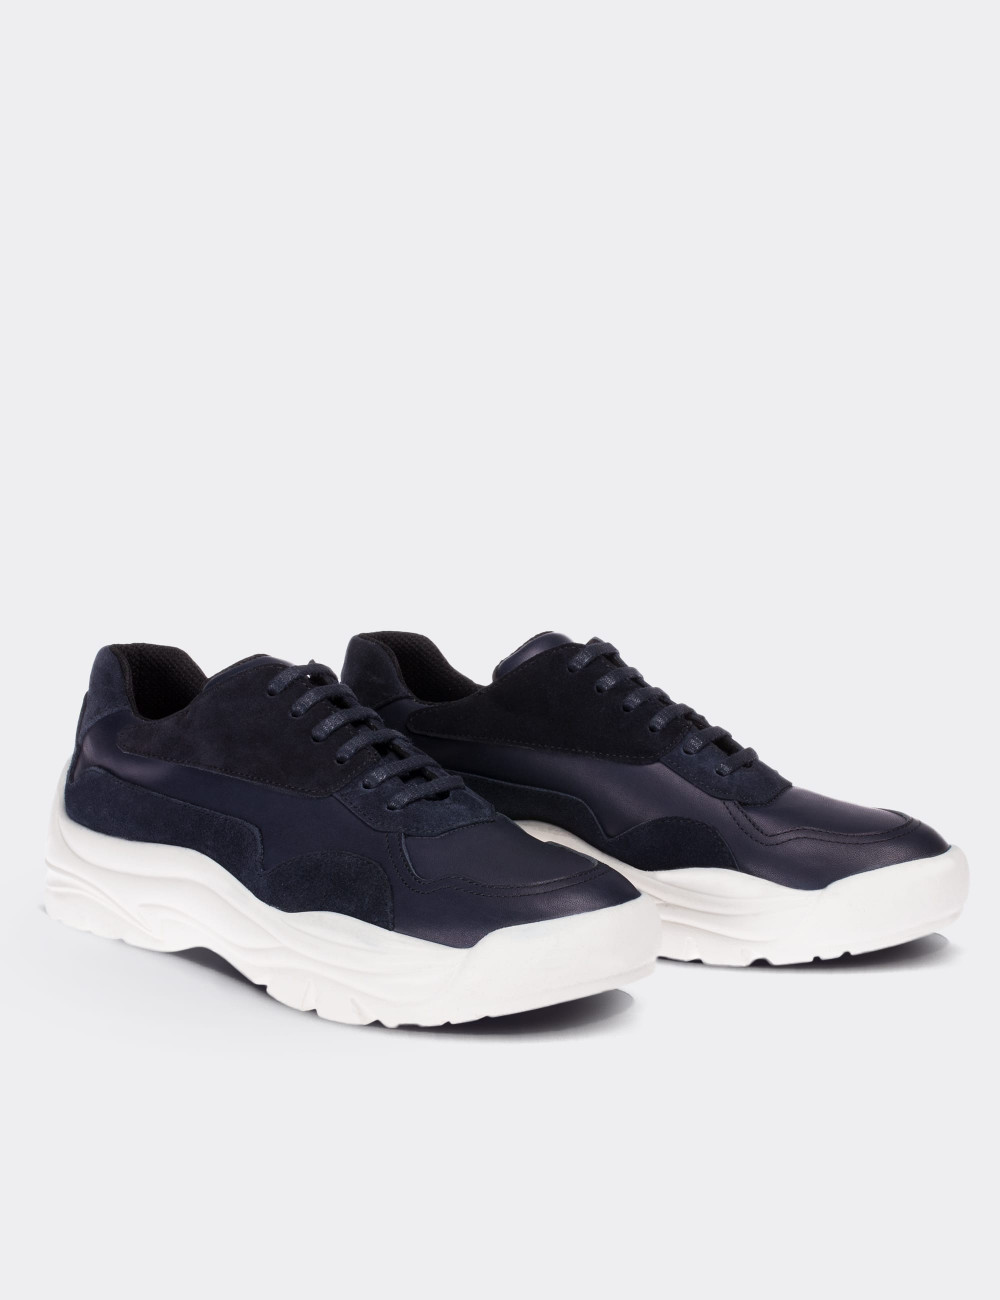 Navy Suede Leather Sneakers - 01732MLCVP01